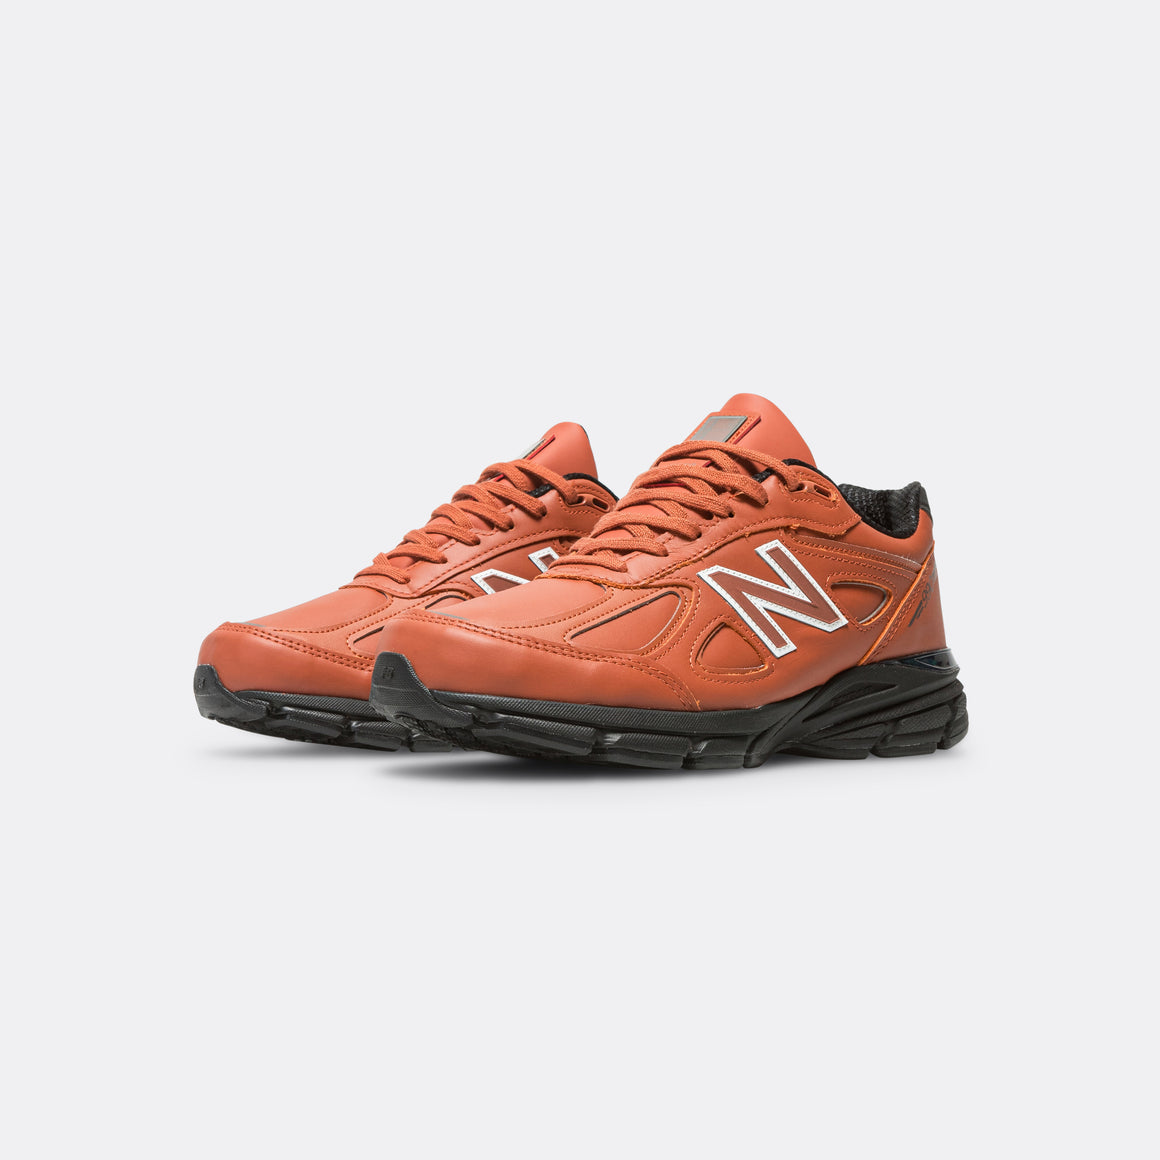 New Balance - 990v4 'Brick Red' – U990RB4 - UP THERE